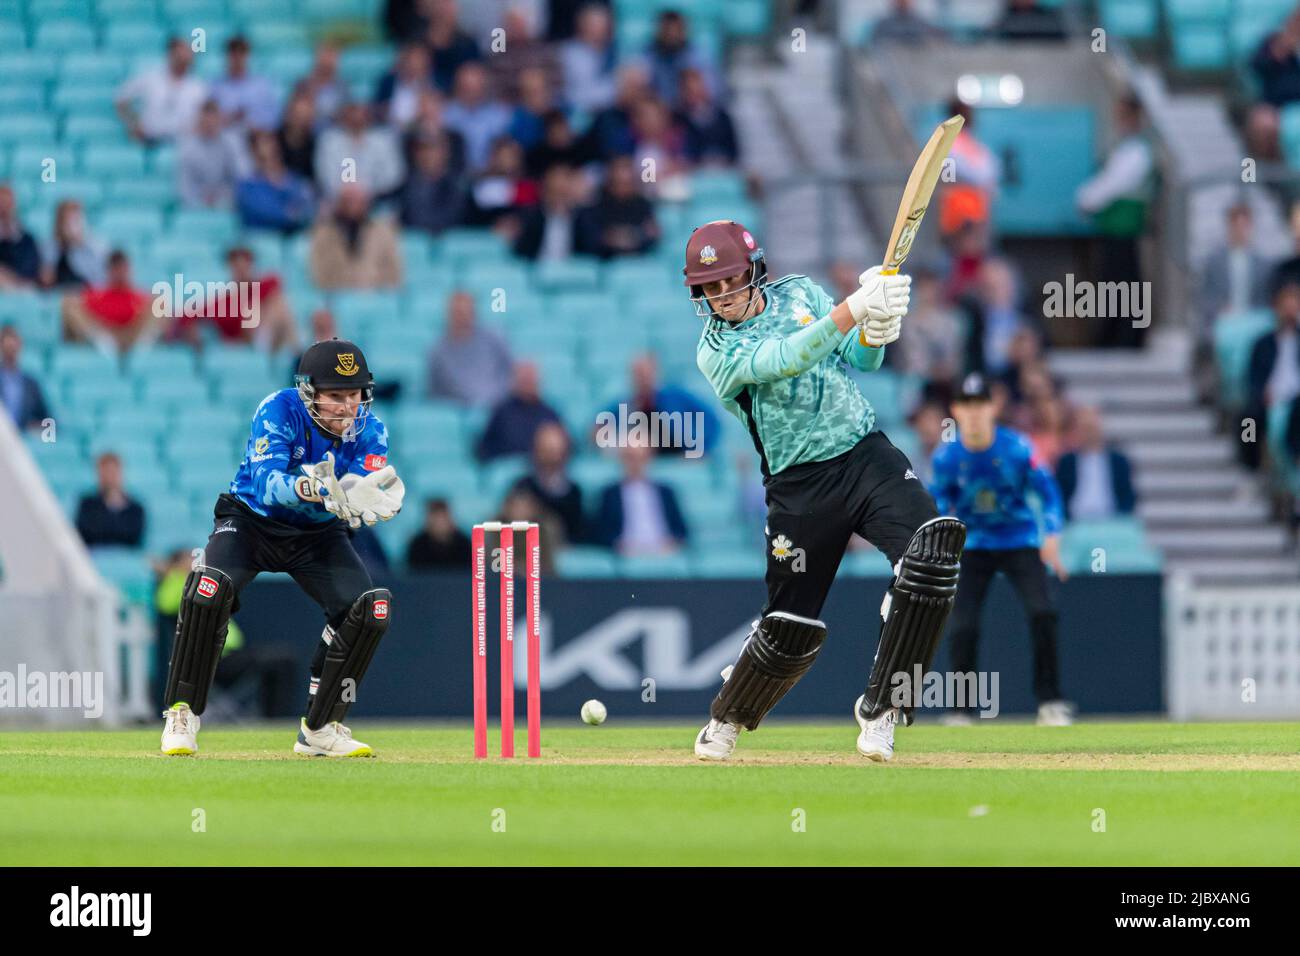 LONDON, UNITED KINGDOM. 08th Jun, 2022. Jason Roy of Surrey Cricket Club (right) and Tim Seifert of Sussex Crircket Club (left) during Vitality Blast - Surry vs Sussex Sharks at The Kia Oval Cricket Ground on Wednesday, June 08, 2022 in LONDON ENGLAND.  Credit: Taka G Wu/Alamy Live News Stock Photo